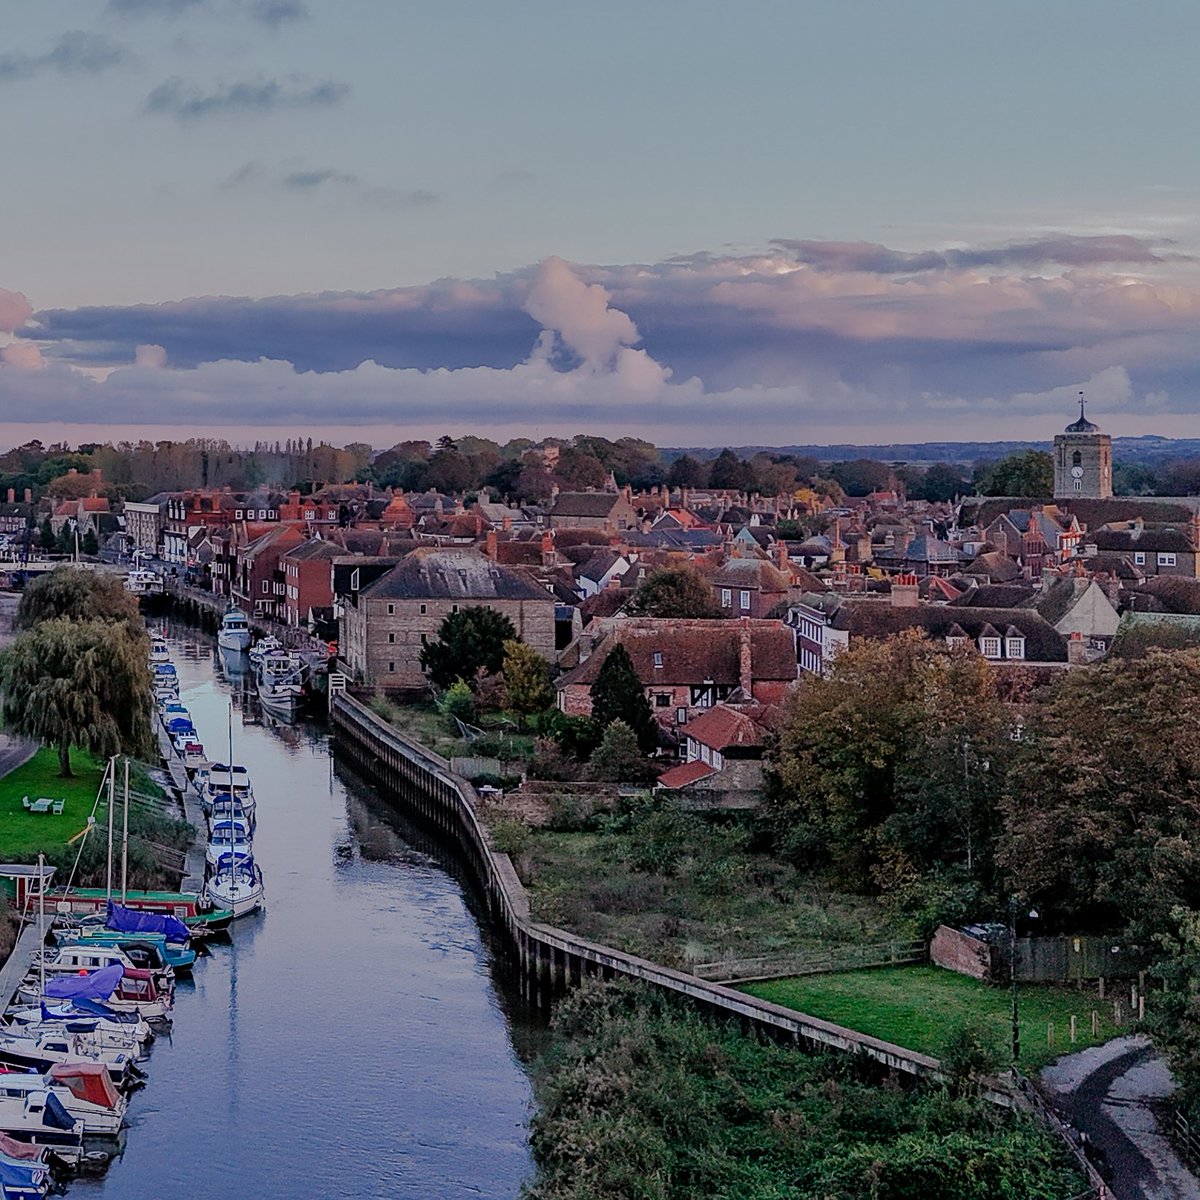 It's #NationalSandwichDay 📷and we're celebrating our very own and the best sandwich of them all, the beautiful town of Sandwich in Kent. Don't just take our word for it - the town features on Susan Calman's #GrandDayOut at 8pm today on C5. 
📷 kcphotographyanddesign.co.uk